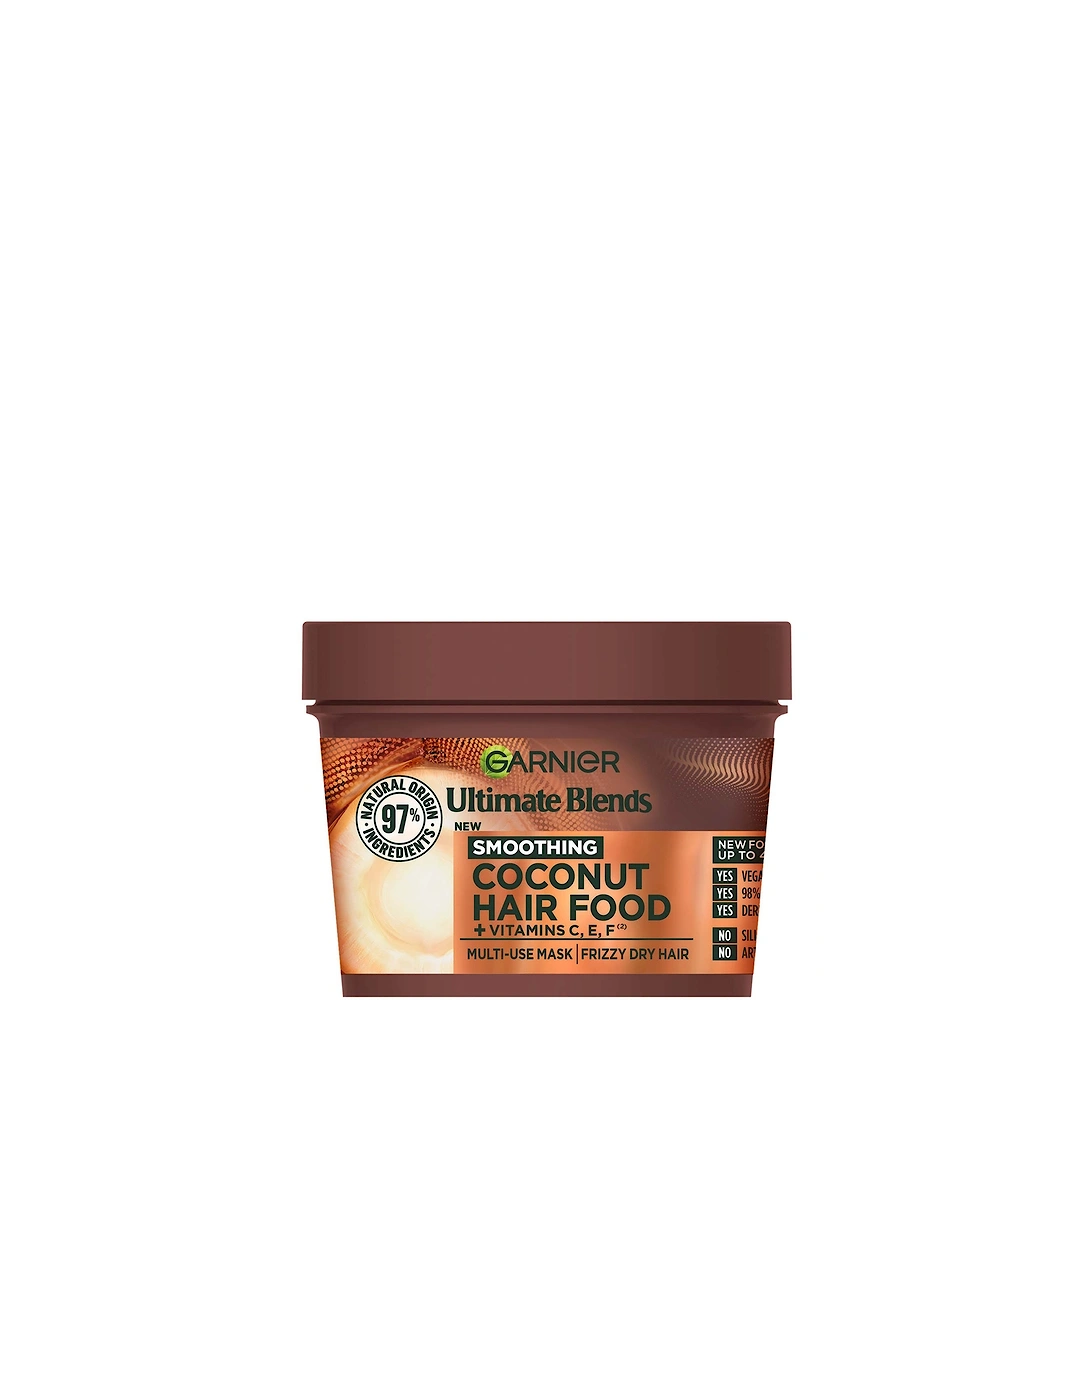 Ultimate Blends Hair Food Coconut Oil 3-in-1 Frizzy Hair Mask Treatment 390ml - Garnier, 2 of 1